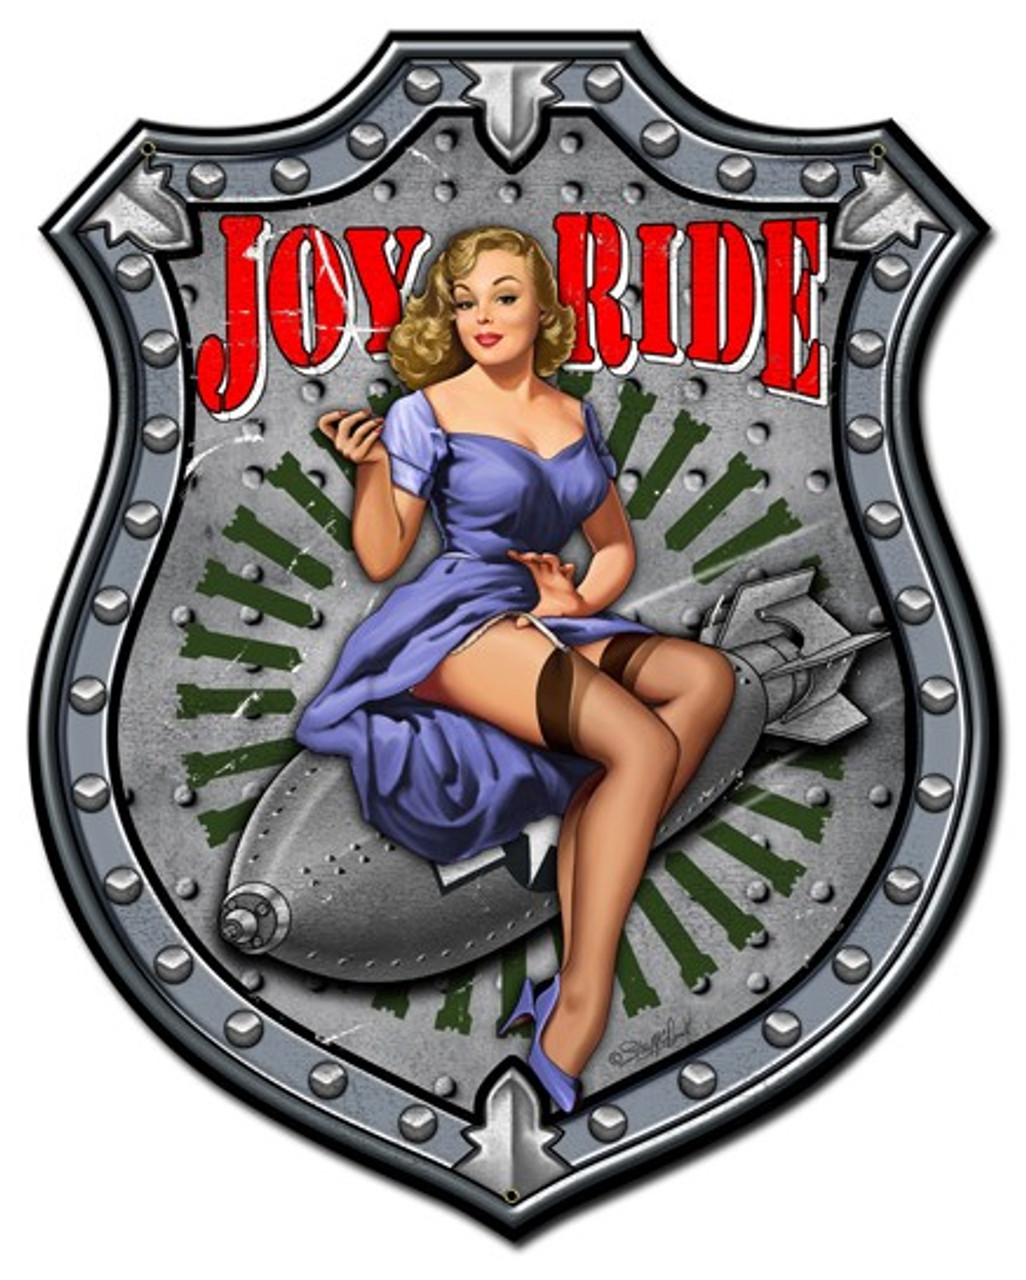 Joy Ride Metal Sign 24 x 30 Inches